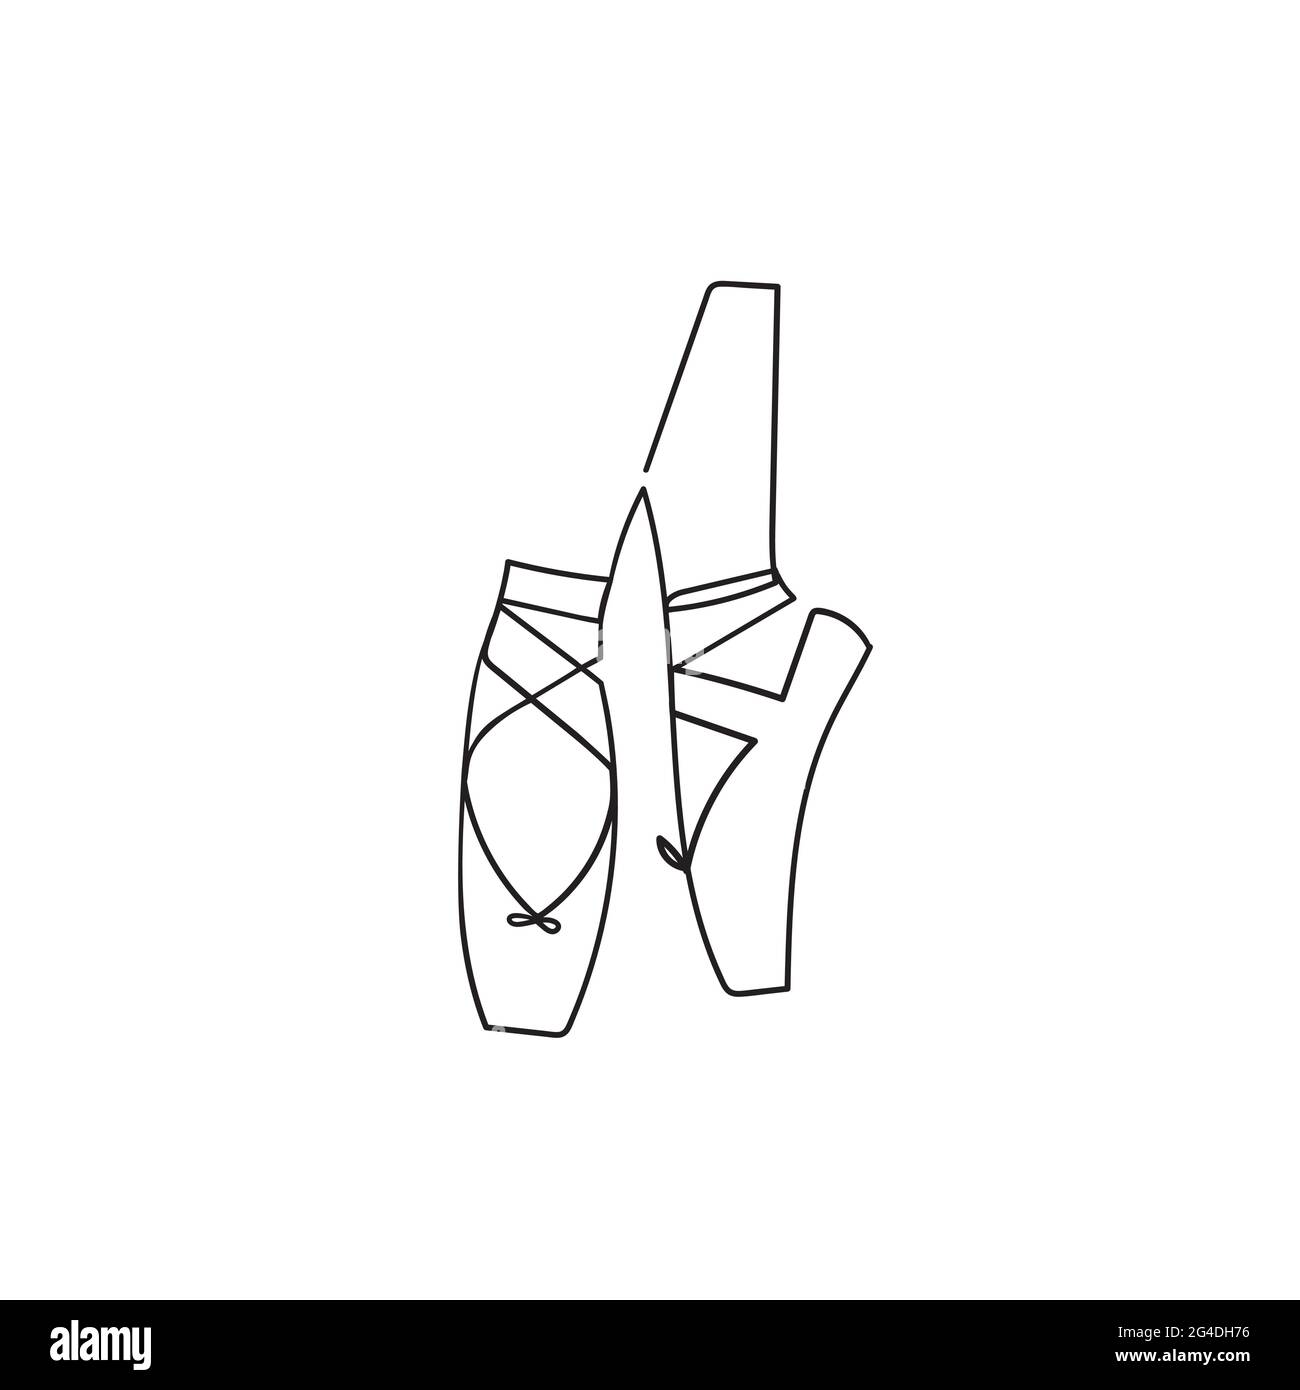 Ballerina legs in pointe shoes continuous line drawing. Ballet shoes with ribbons.Stock vector illustration isolated on white background.One line Stock Vector